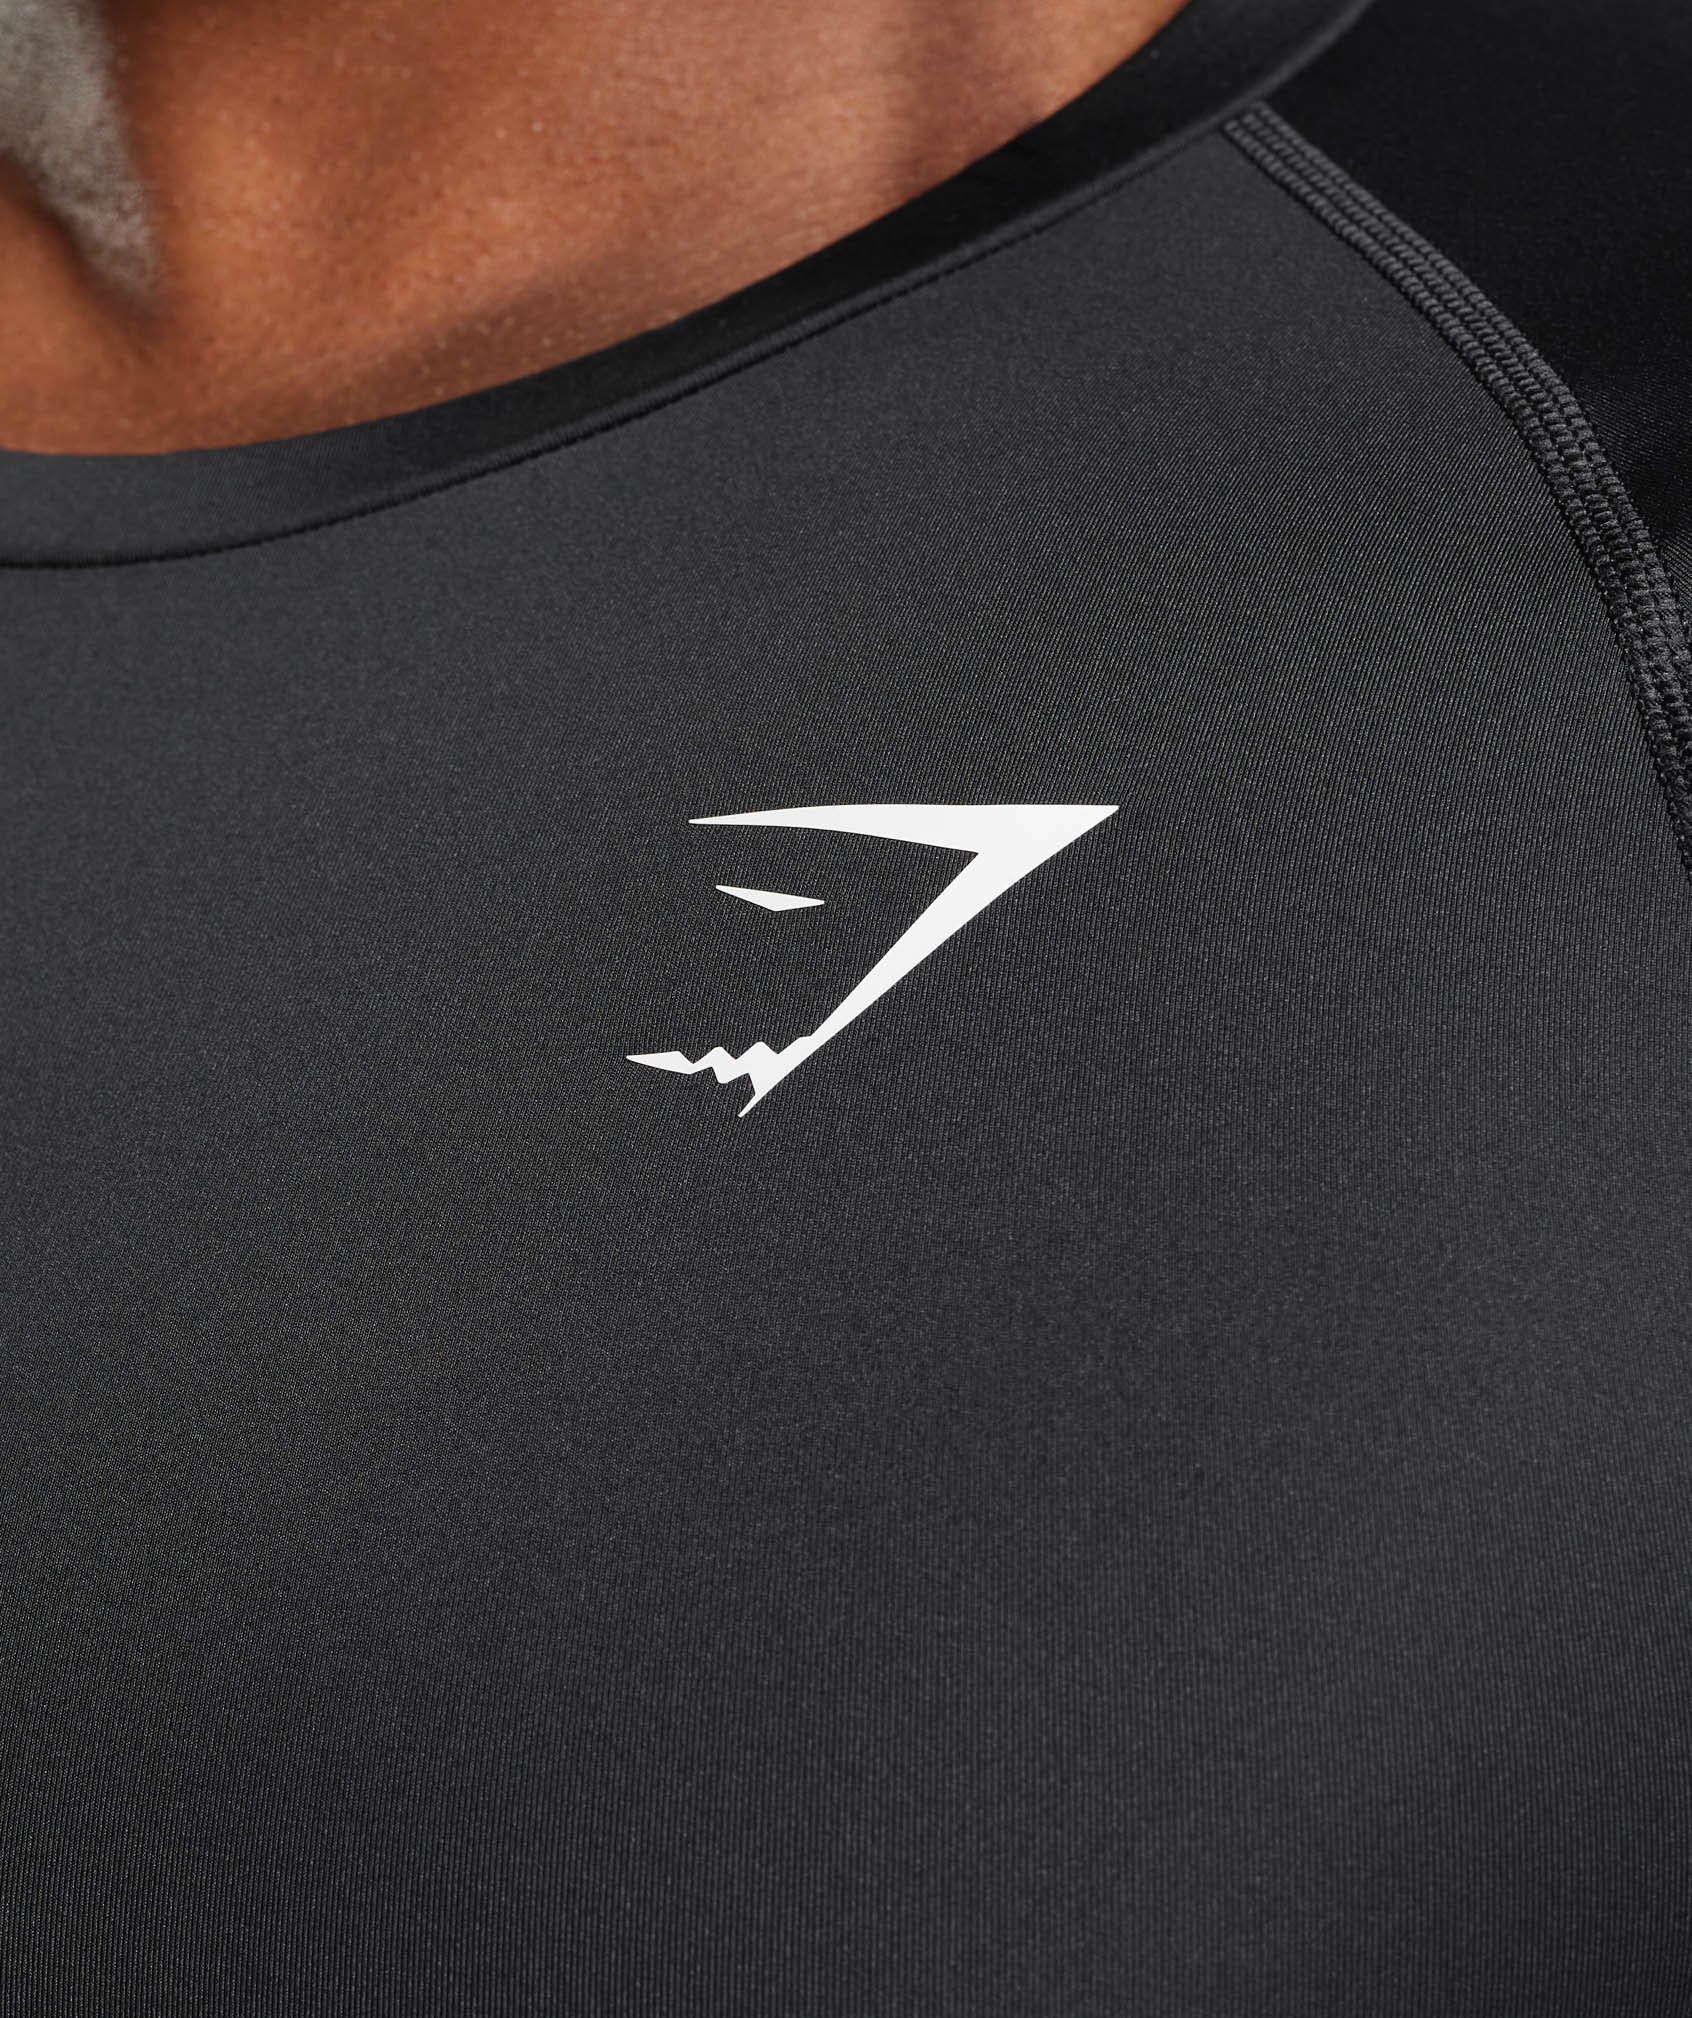 Base Layers - Gymshark Products For Sale - Mcvallescrivia